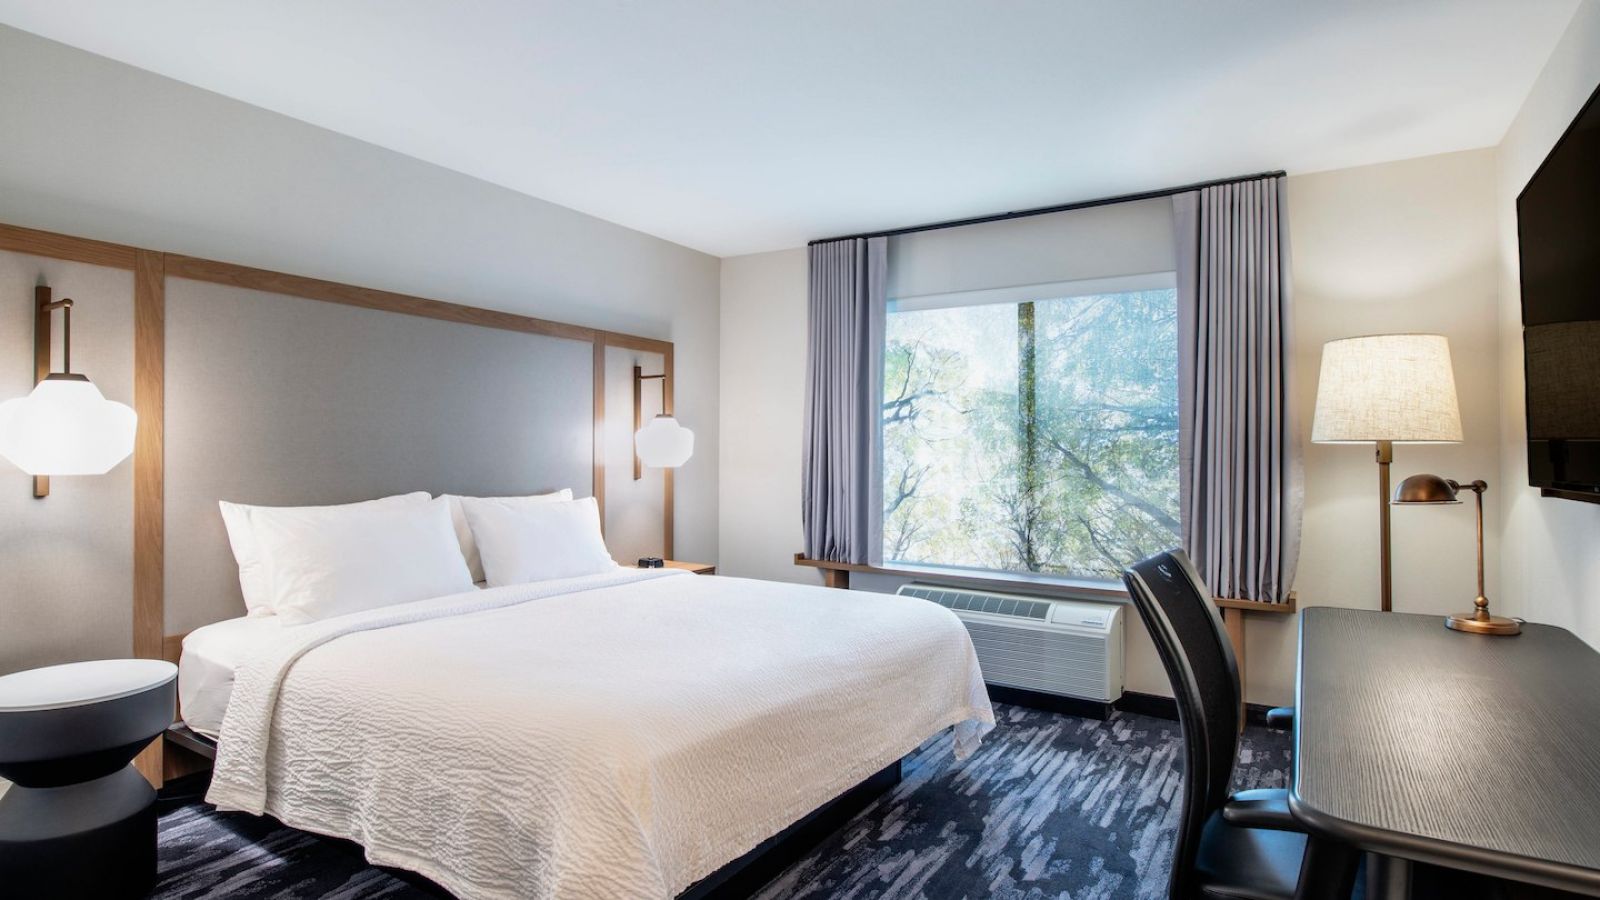 Enjoy complimentary Wi-Fi, a large flat-screen TV and a spacious work desk in our newly renovated king guest room